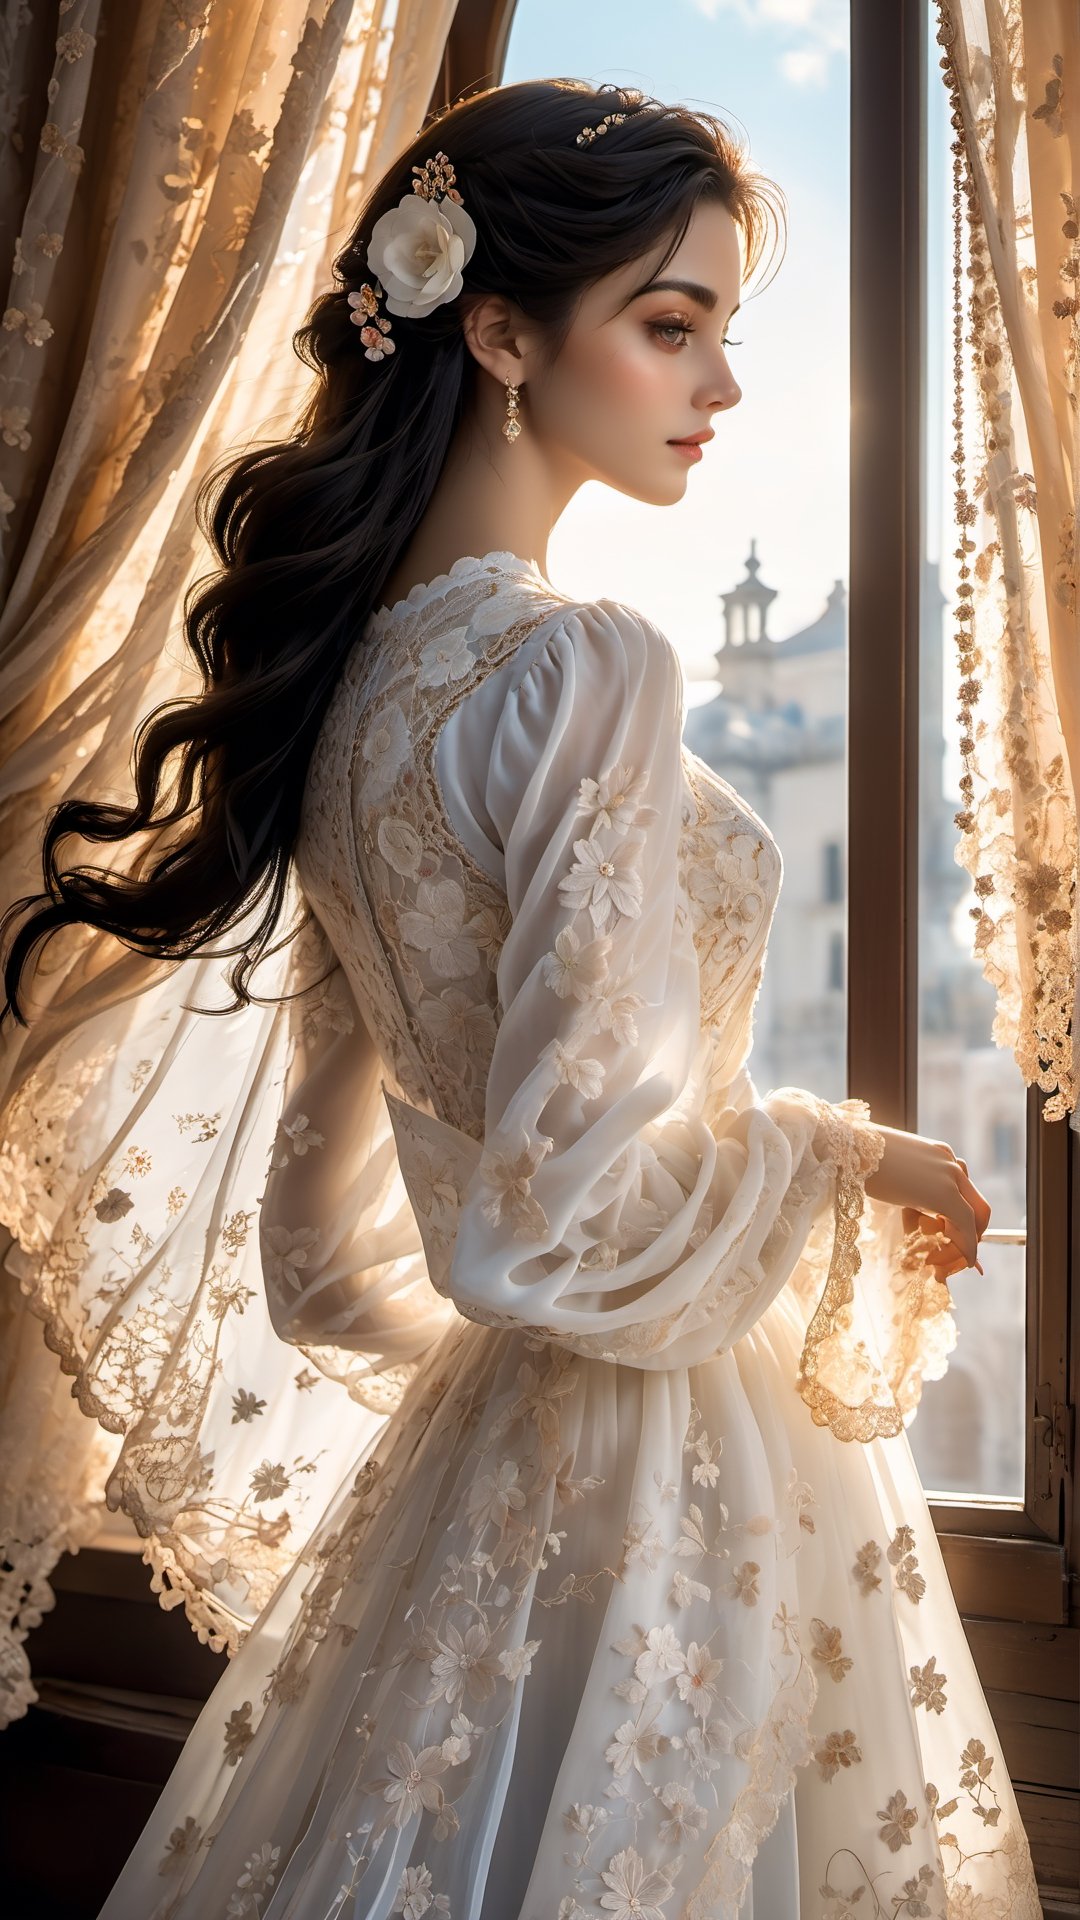 a beautiful Spanish lady sits by the window, a transparent embroidered curtain is swayed by a breeze,  wearing a combination dress made of richelieu lace, made of snow-white fine fabric, the sun's rays fall on the girl's flowing long dark hair, she dreams, delicate pastel colors, velvet bedspreads, many interesting details, flowers, figurines, marble, crystal in the room